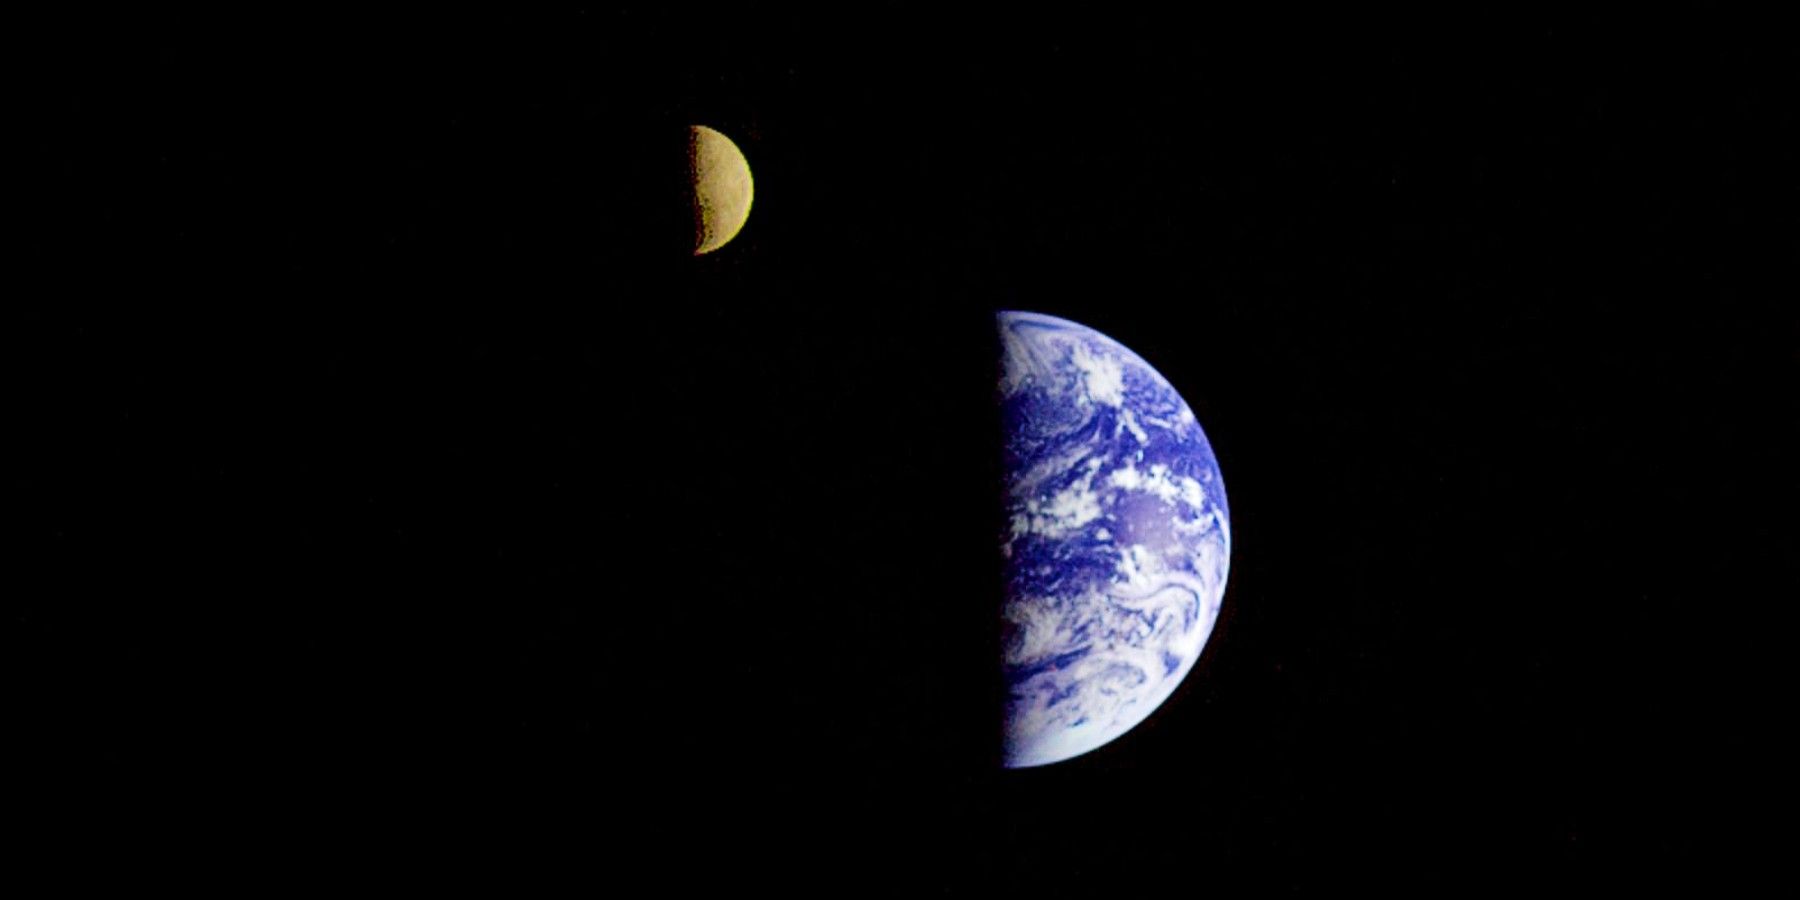 1992 picture of the moon and earth